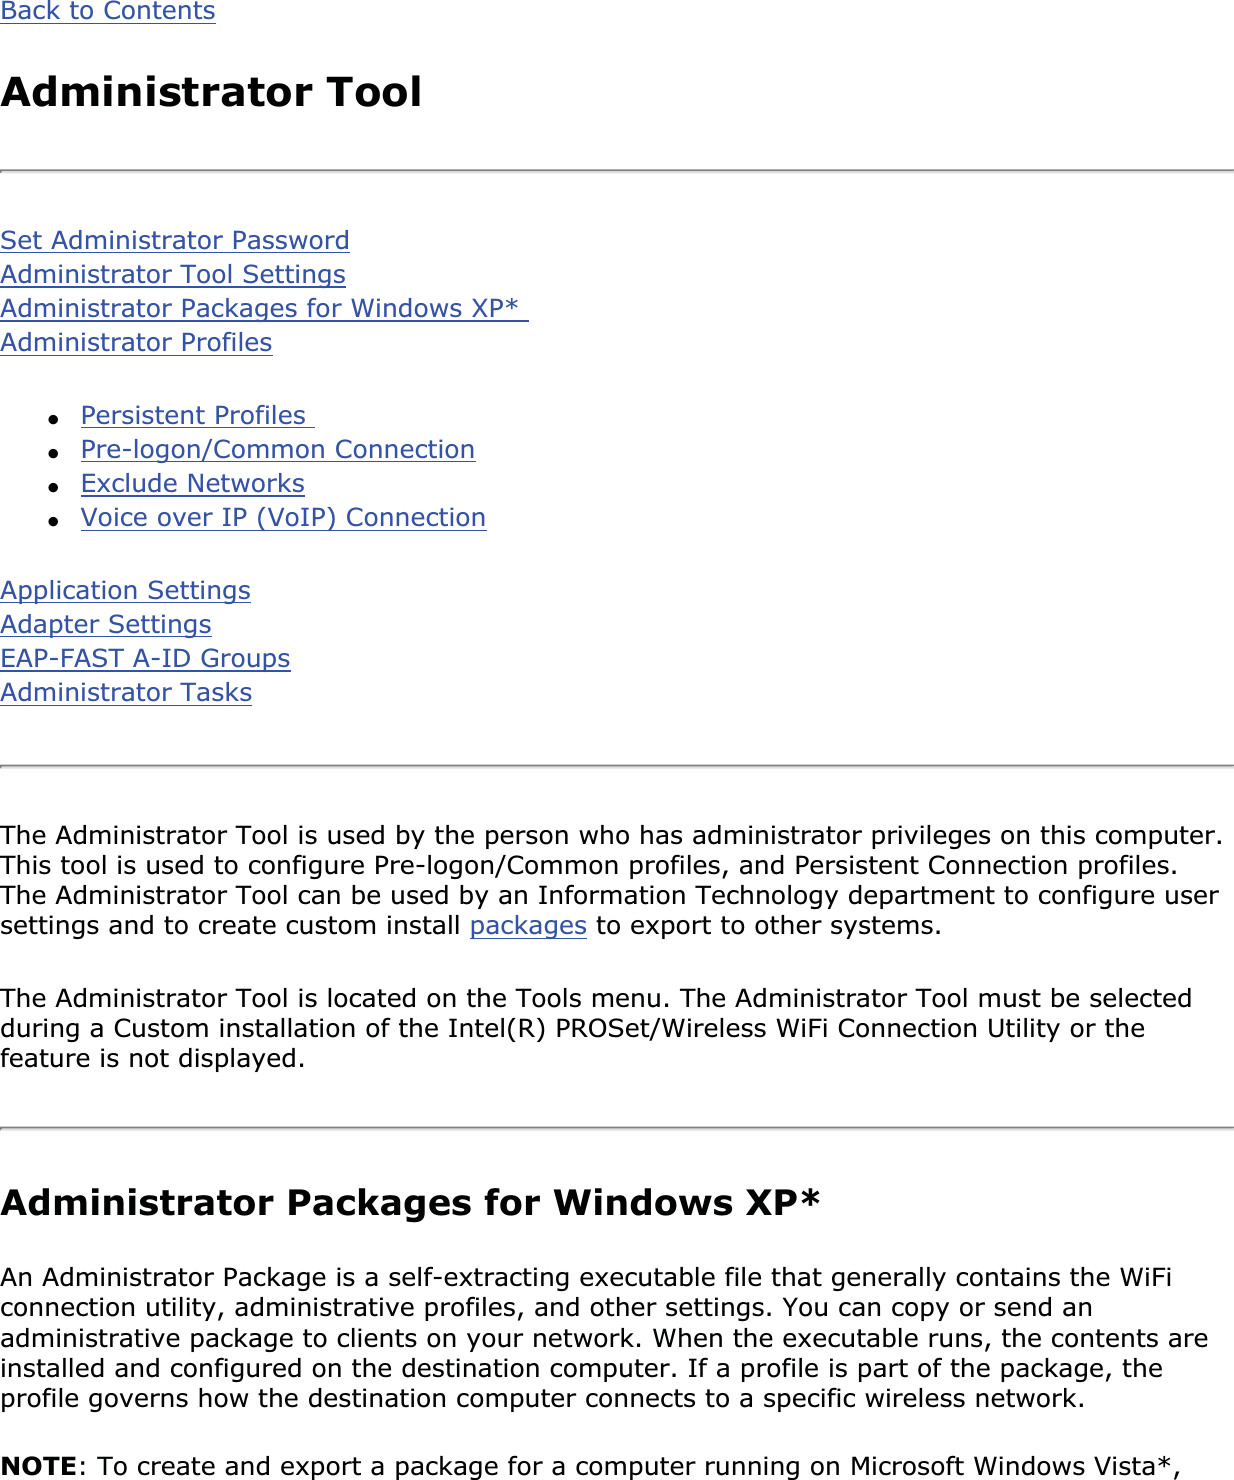 Back to ContentsAdministrator ToolSet Administrator PasswordAdministrator Tool SettingsAdministrator Packages for Windows XP* Administrator Profiles●Persistent Profiles ●Pre-logon/Common Connection●Exclude Networks●Voice over IP (VoIP) ConnectionApplication SettingsAdapter SettingsEAP-FAST A-ID GroupsAdministrator TasksThe Administrator Tool is used by the person who has administrator privileges on this computer. This tool is used to configure Pre-logon/Common profiles, and Persistent Connection profiles. The Administrator Tool can be used by an Information Technology department to configure user settings and to create custom install packages to export to other systems.The Administrator Tool is located on the Tools menu. The Administrator Tool must be selected during a Custom installation of the Intel(R) PROSet/Wireless WiFi Connection Utility or the feature is not displayed.Administrator Packages for Windows XP*An Administrator Package is a self-extracting executable file that generally contains the WiFi connection utility, administrative profiles, and other settings. You can copy or send an administrative package to clients on your network. When the executable runs, the contents are installed and configured on the destination computer. If a profile is part of the package, the profile governs how the destination computer connects to a specific wireless network.NOTE: To create and export a package for a computer running on Microsoft Windows Vista*, 